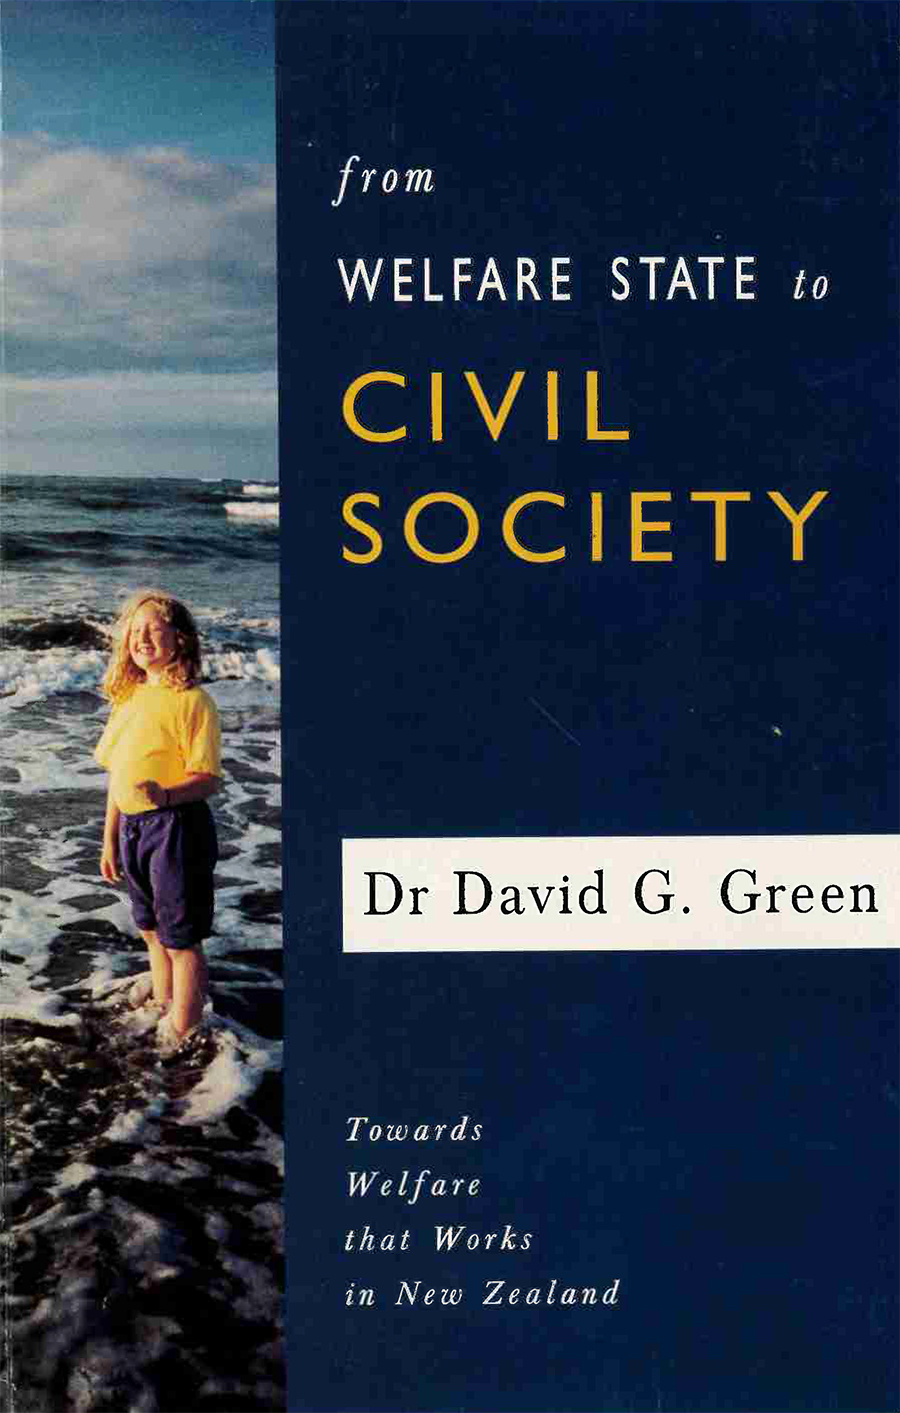 From Welfare State to Civil Society